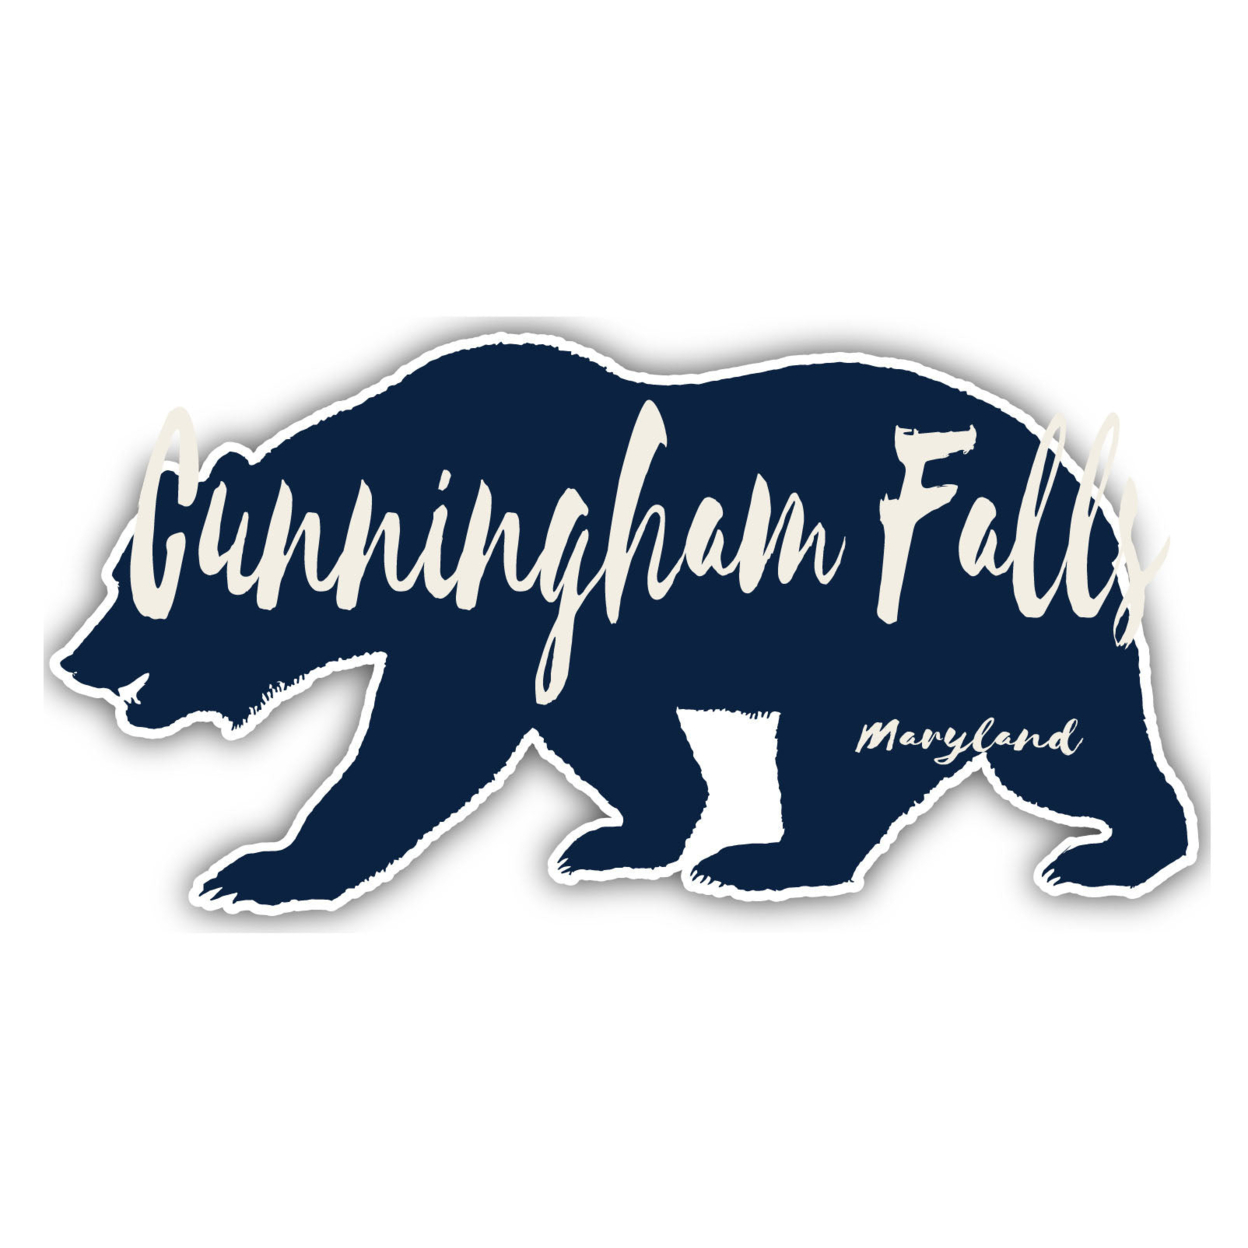 Cunningham Falls Maryland Souvenir Decorative Stickers (Choose Theme And Size) - 4-Pack, 12-Inch, Bear